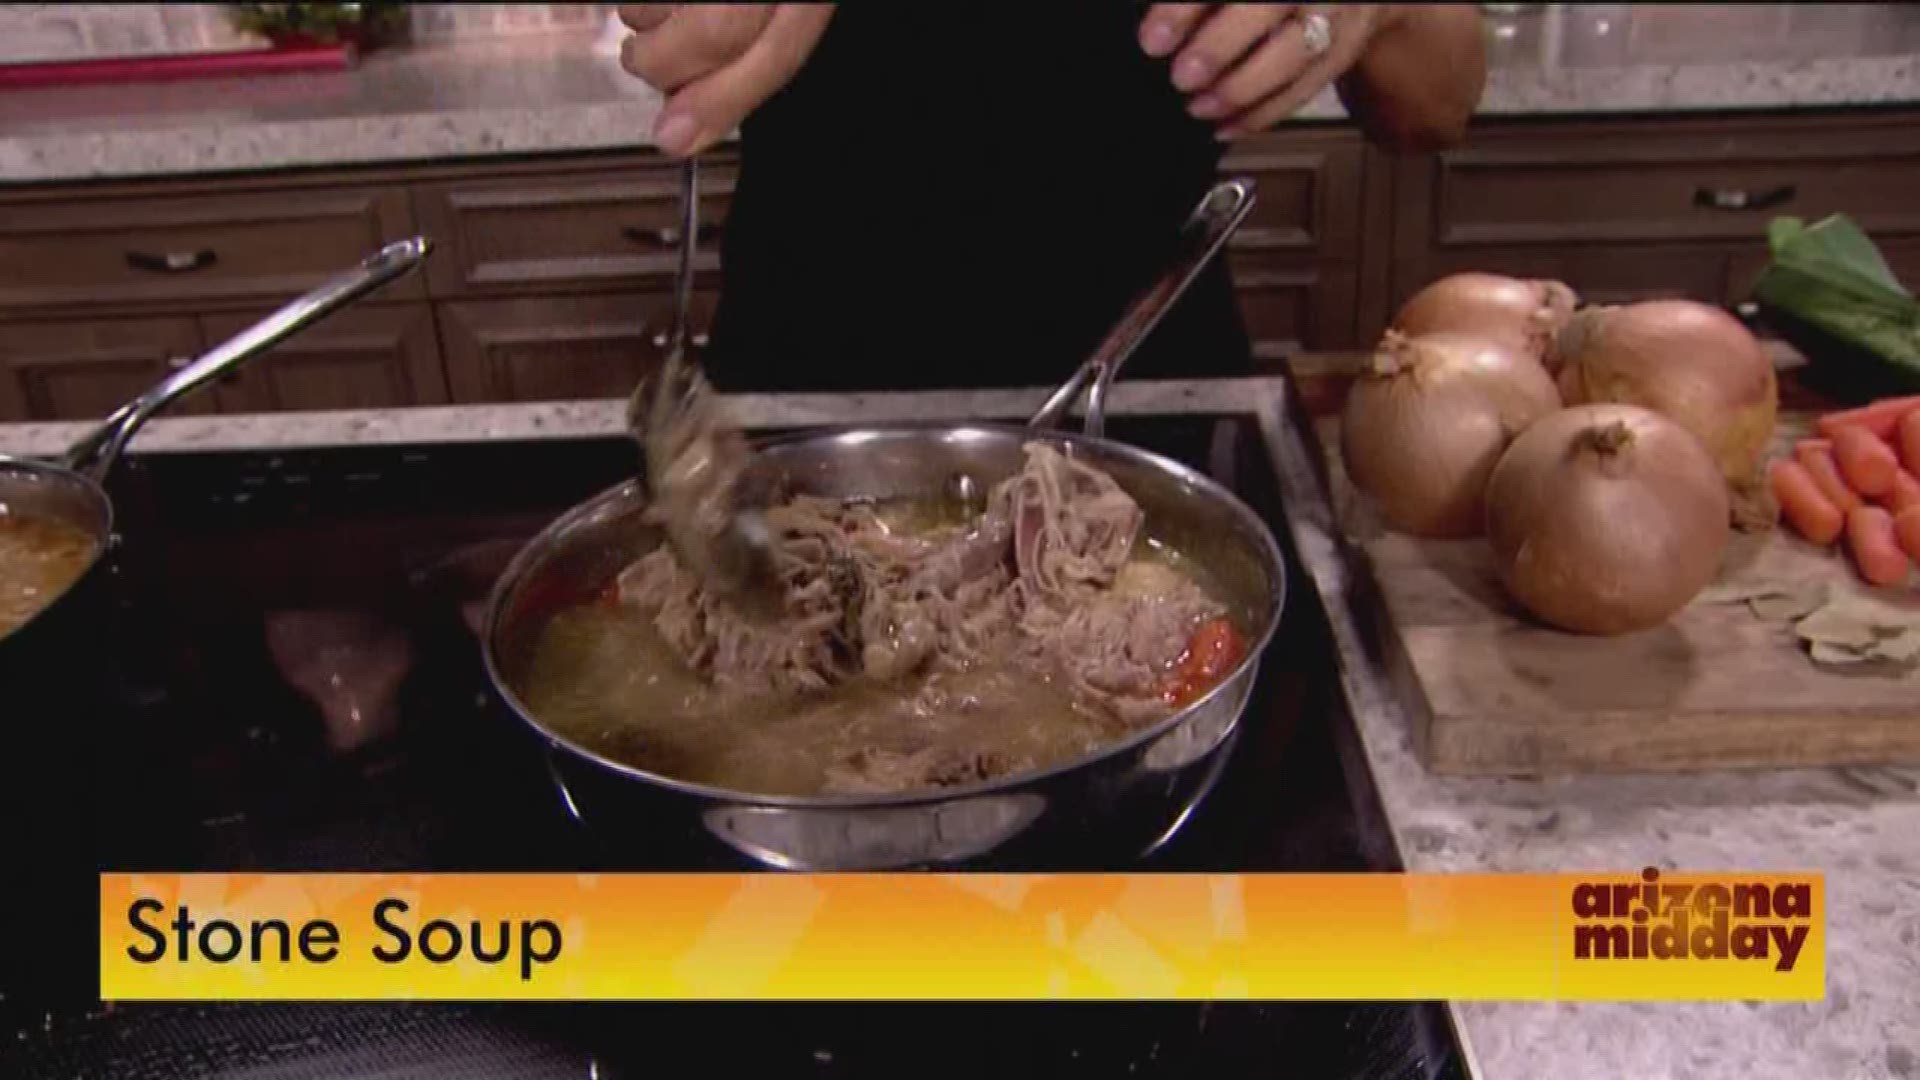 Got leftovers? Jan has got a solution as she shows us how to make stone soup.